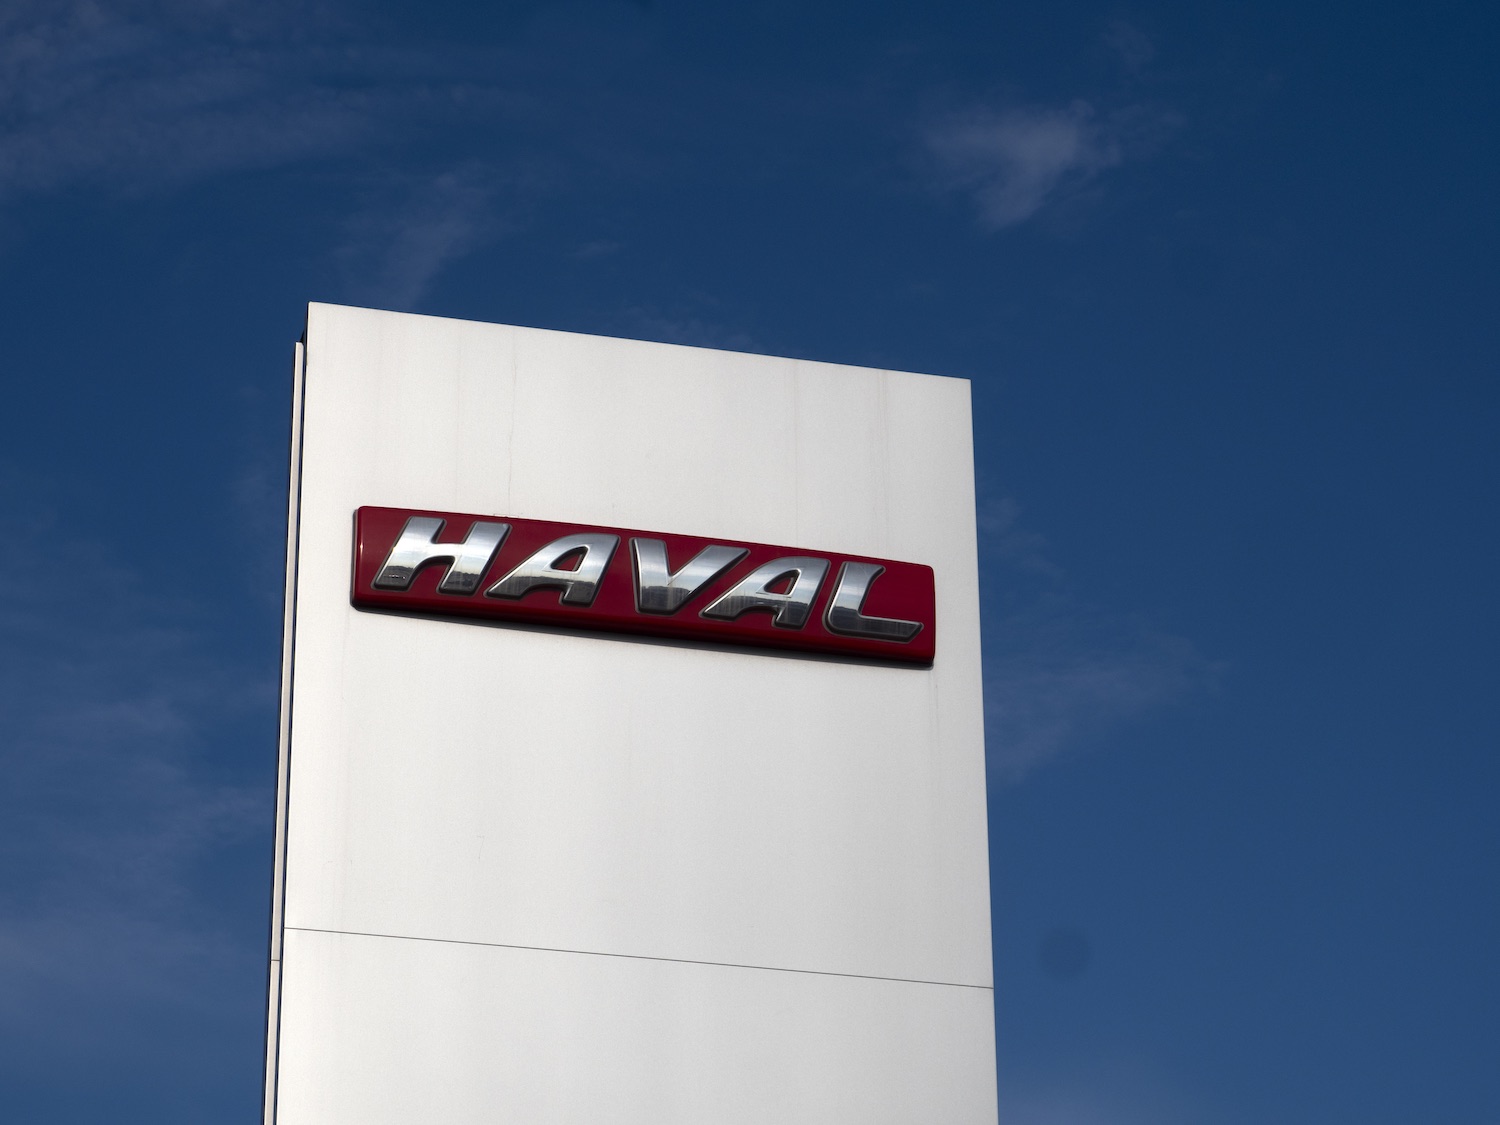 The Haval logo on a sign above a dealership, a blue sky in the background.